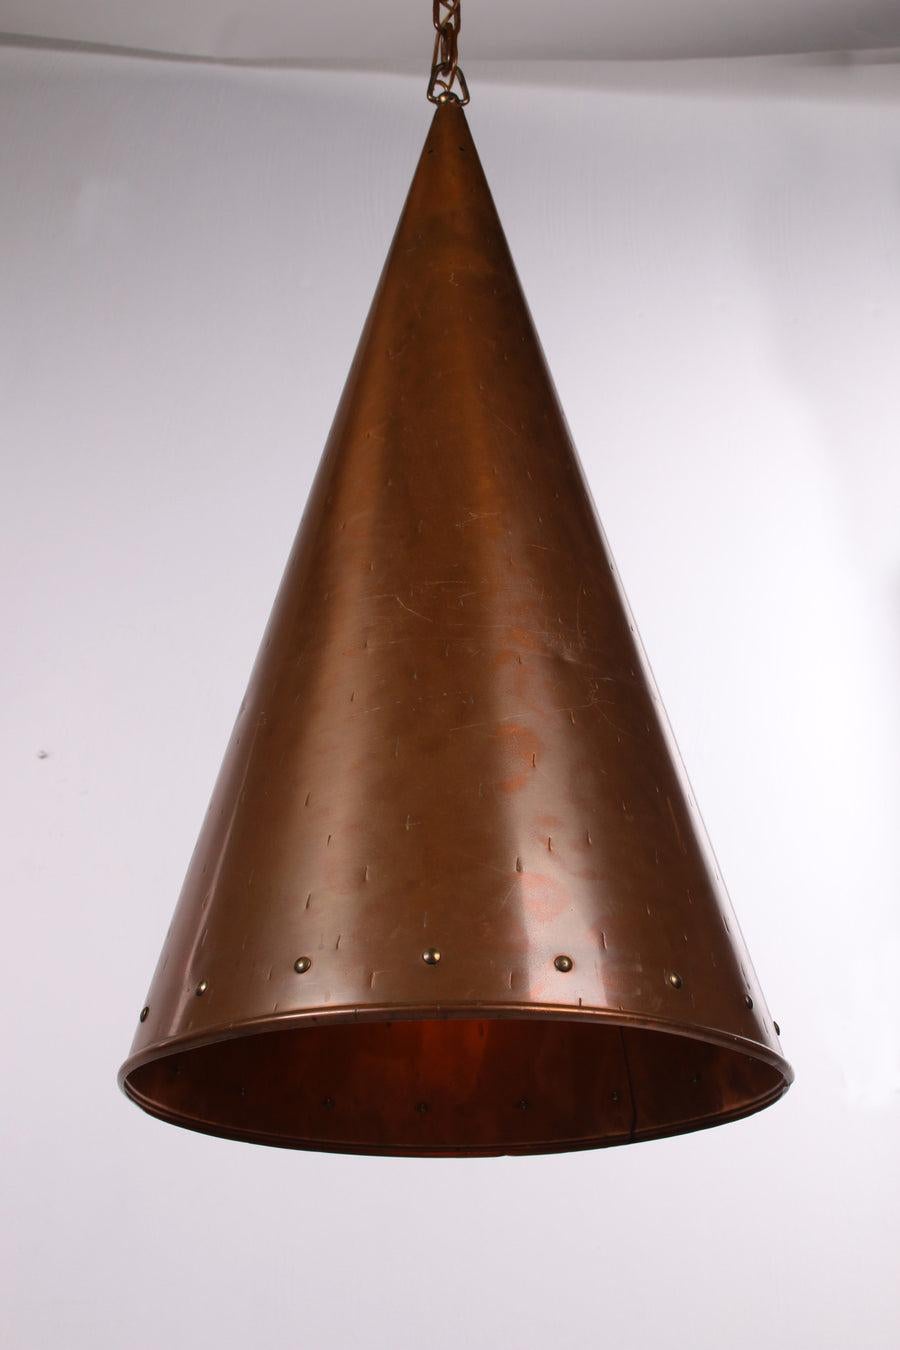 Brutalist Danish Hand Hammered Copper Pendant Lamp from E.S Horn Aalestrup, 50s For Sale